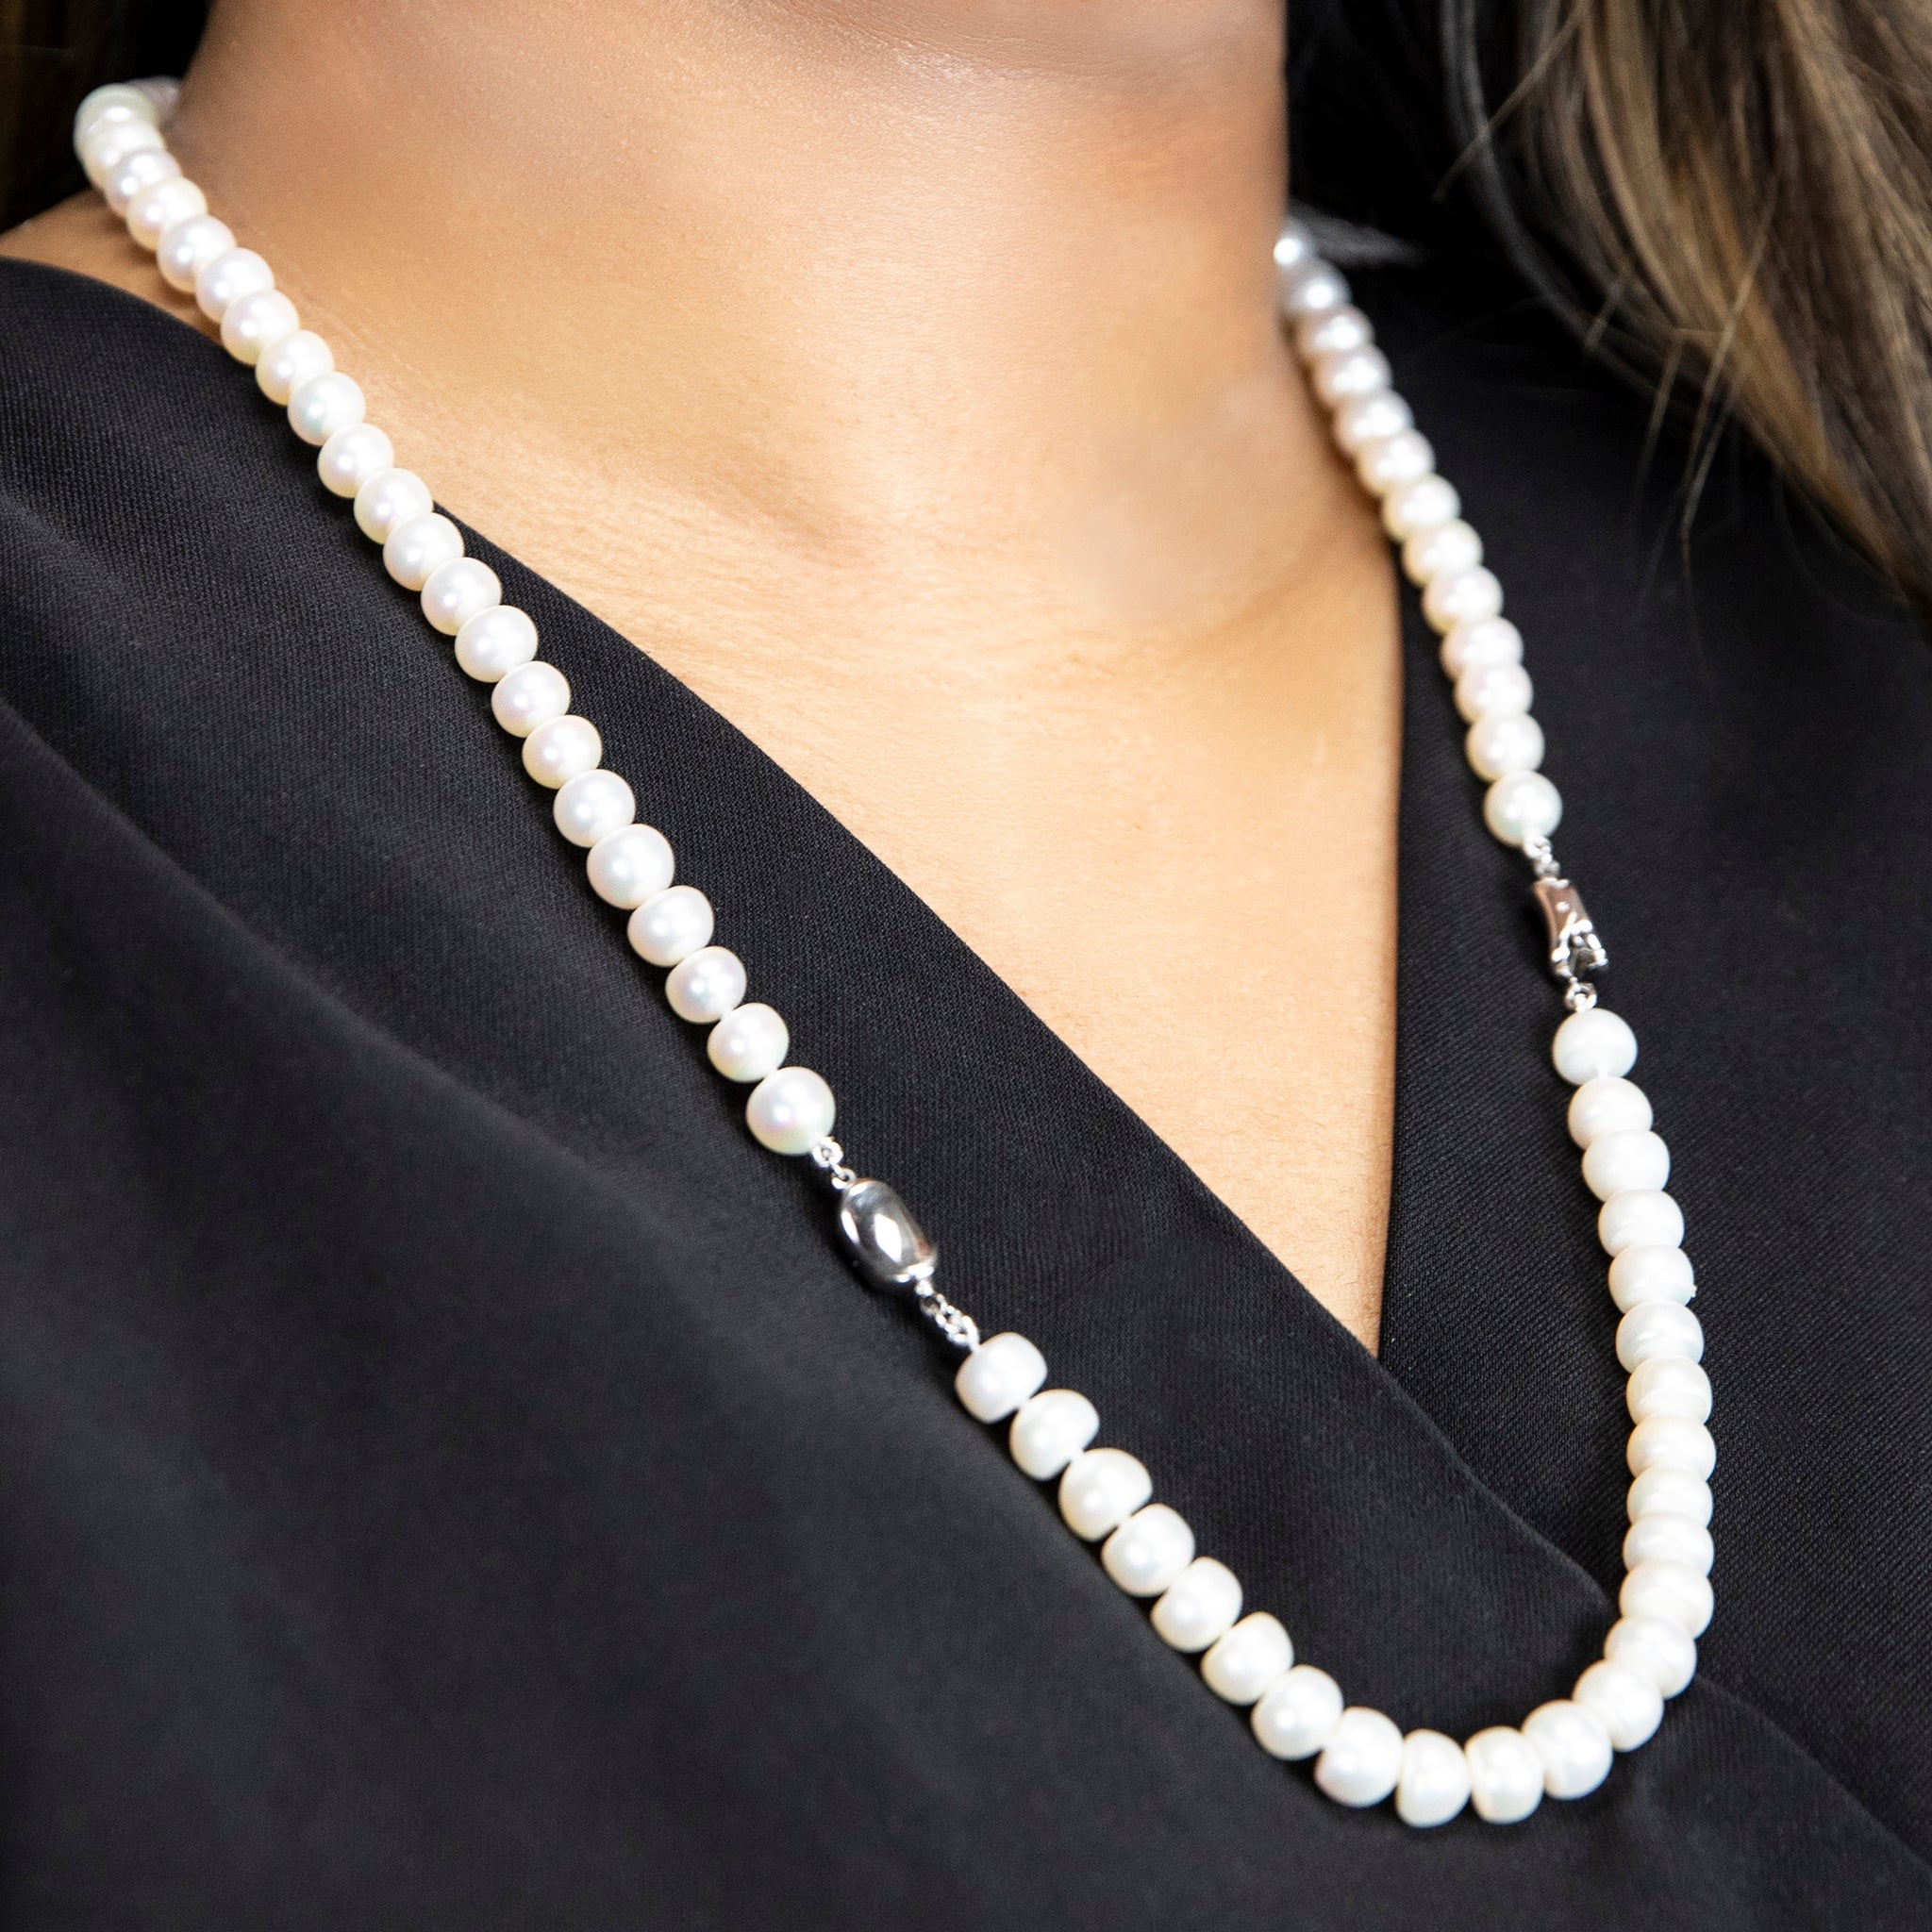 Freshwater Pearl Classic Button Necklace and Bracelet Set in Silver - L'Amour Pearls